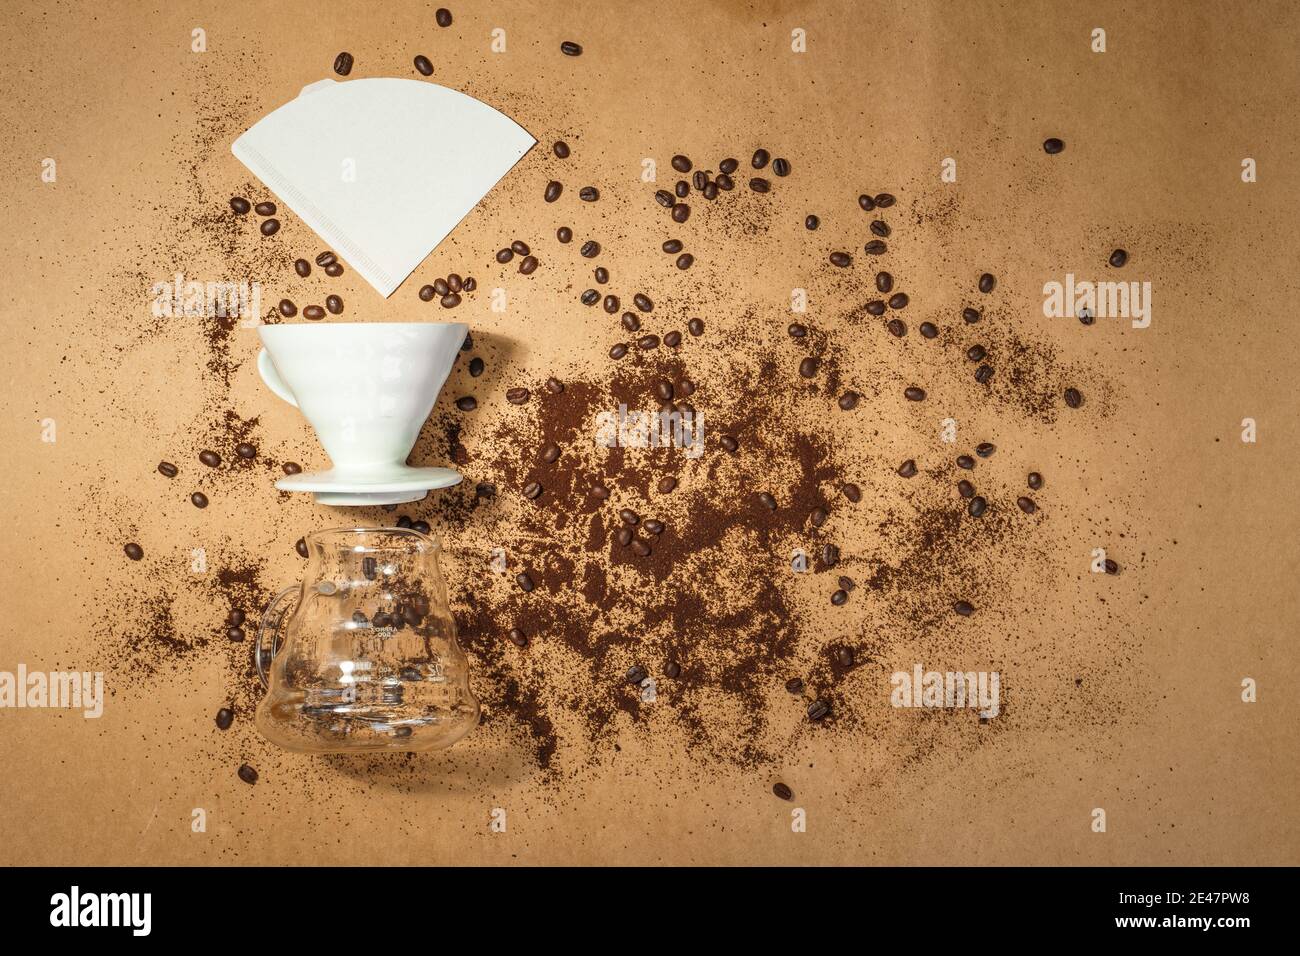 https://c8.alamy.com/comp/2E47PW8/coffee-dripperdrip-paper-and-coffee-drip-jar-on-a-brown-background-2E47PW8.jpg